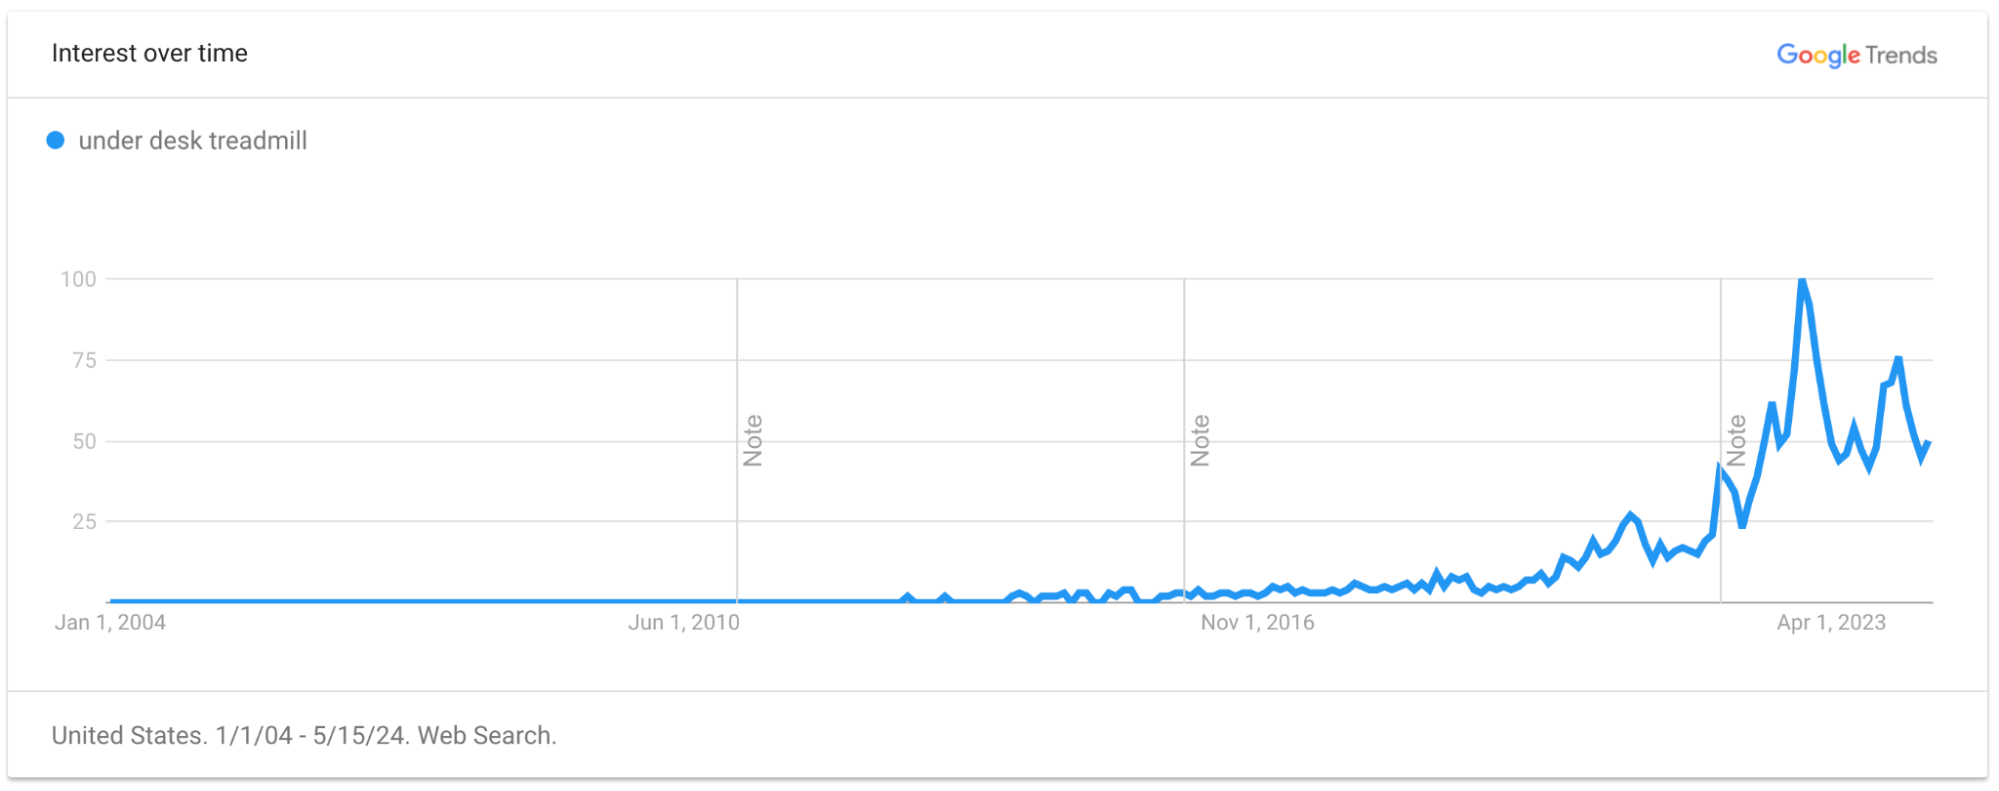 Google Trends data showing an increase in searches for “under desk treadmill”